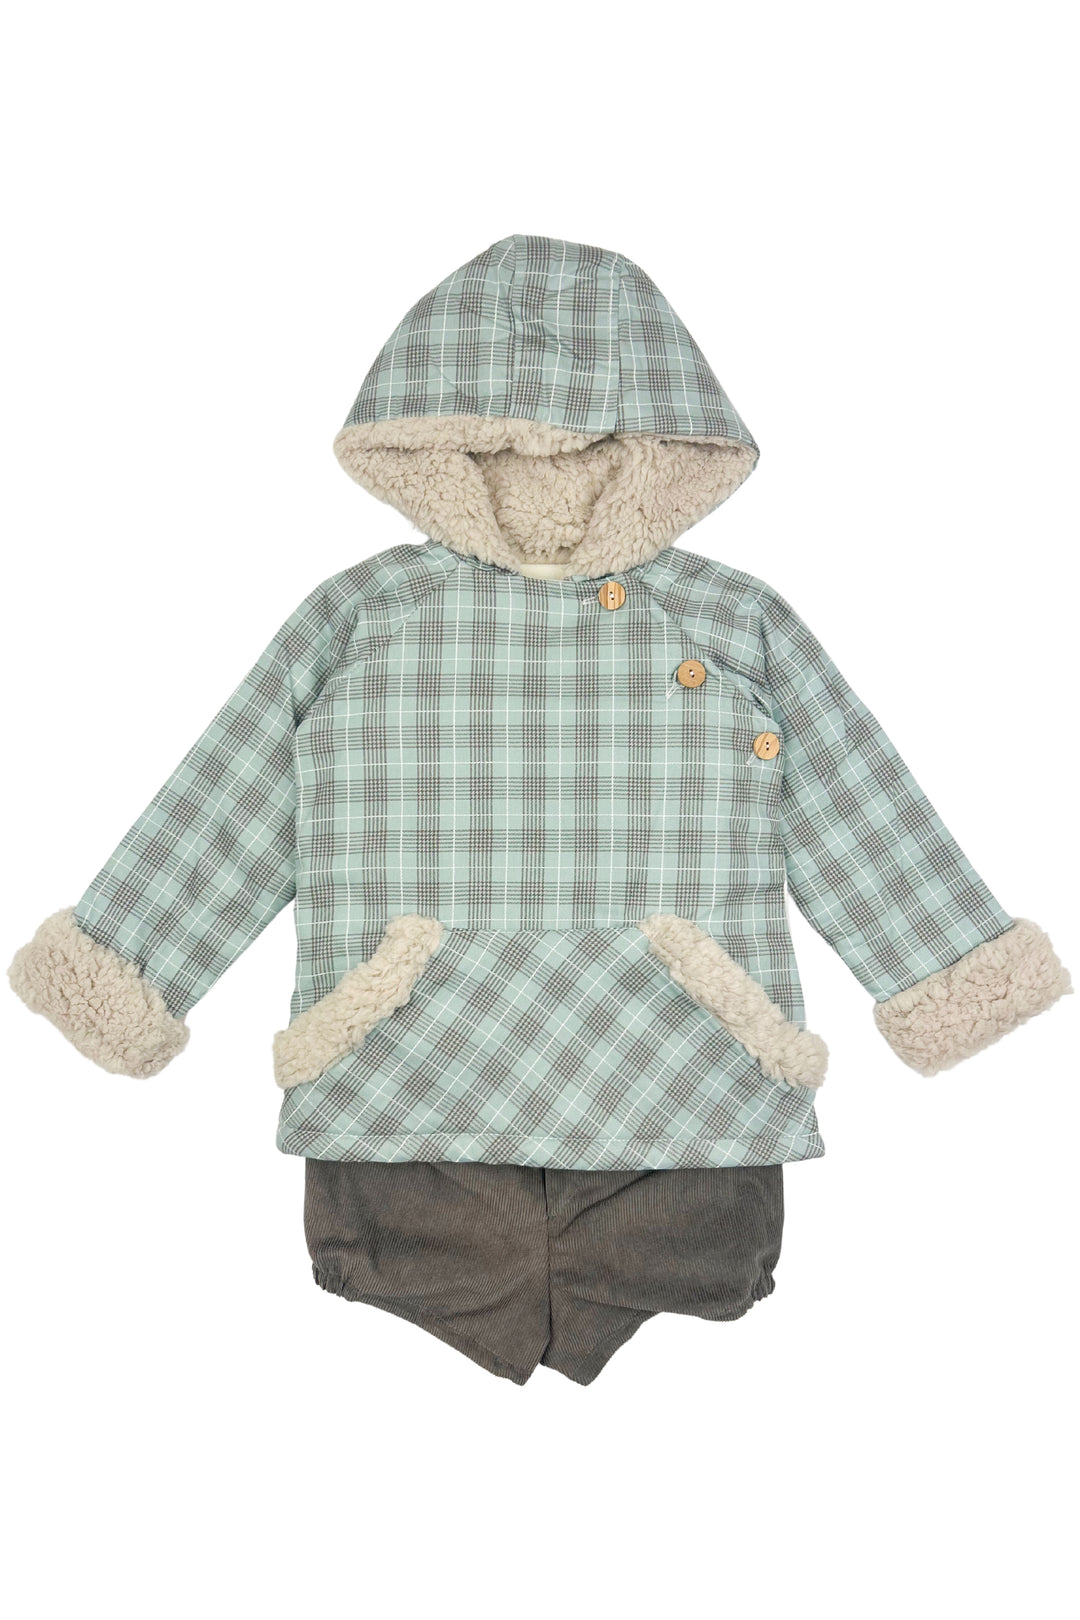 Valentina Bebes "Giovanni" Pale Teal Tartan Hoodie & Cord Shorts | Millie and John